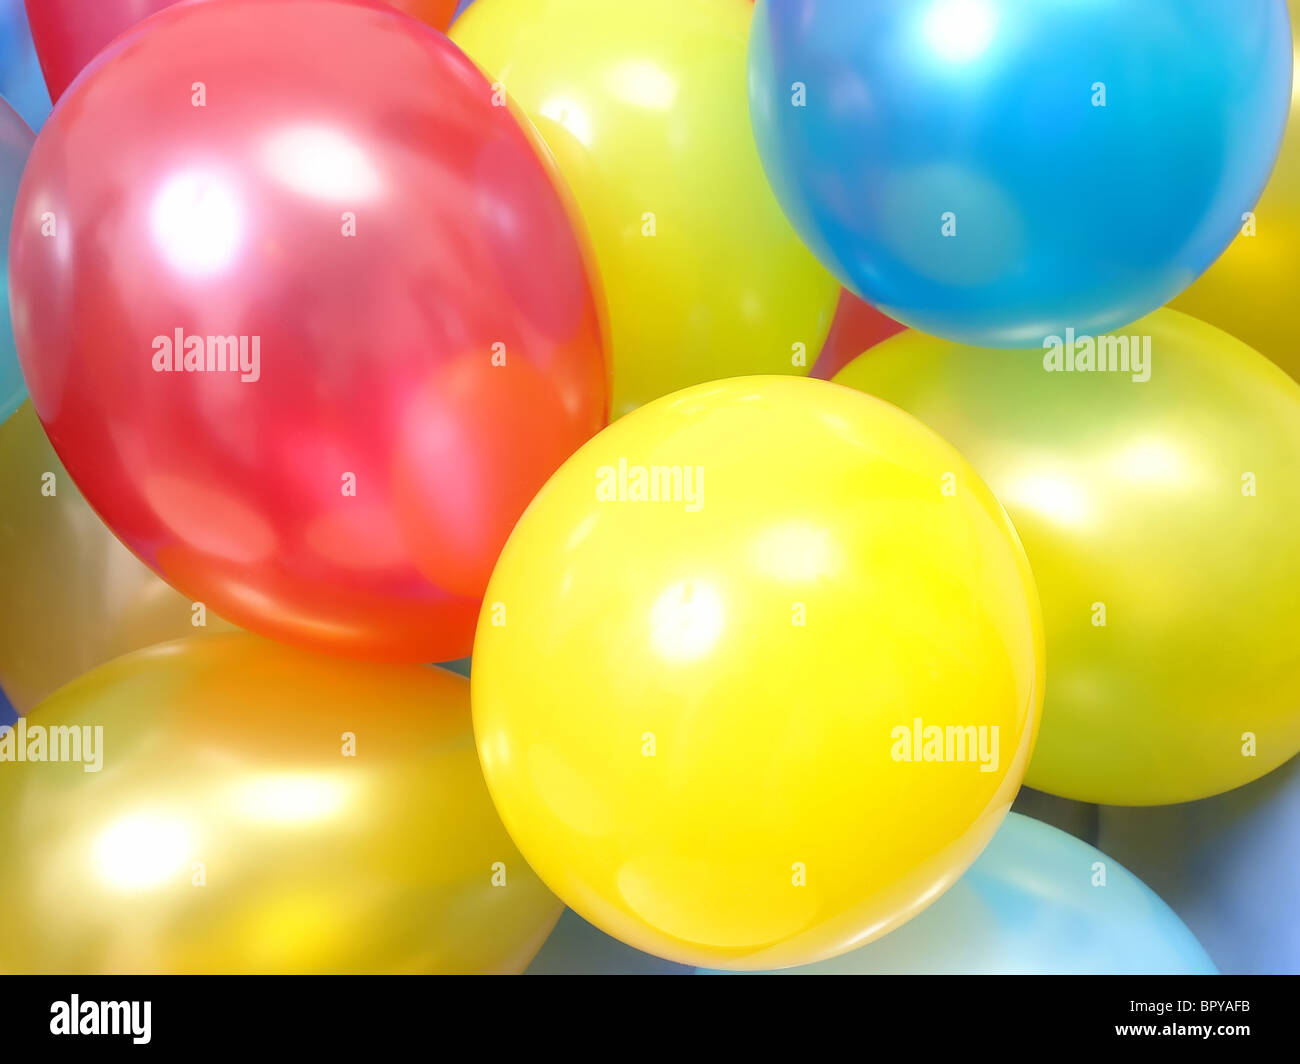 Background of various colorful party balloons Stock Photo